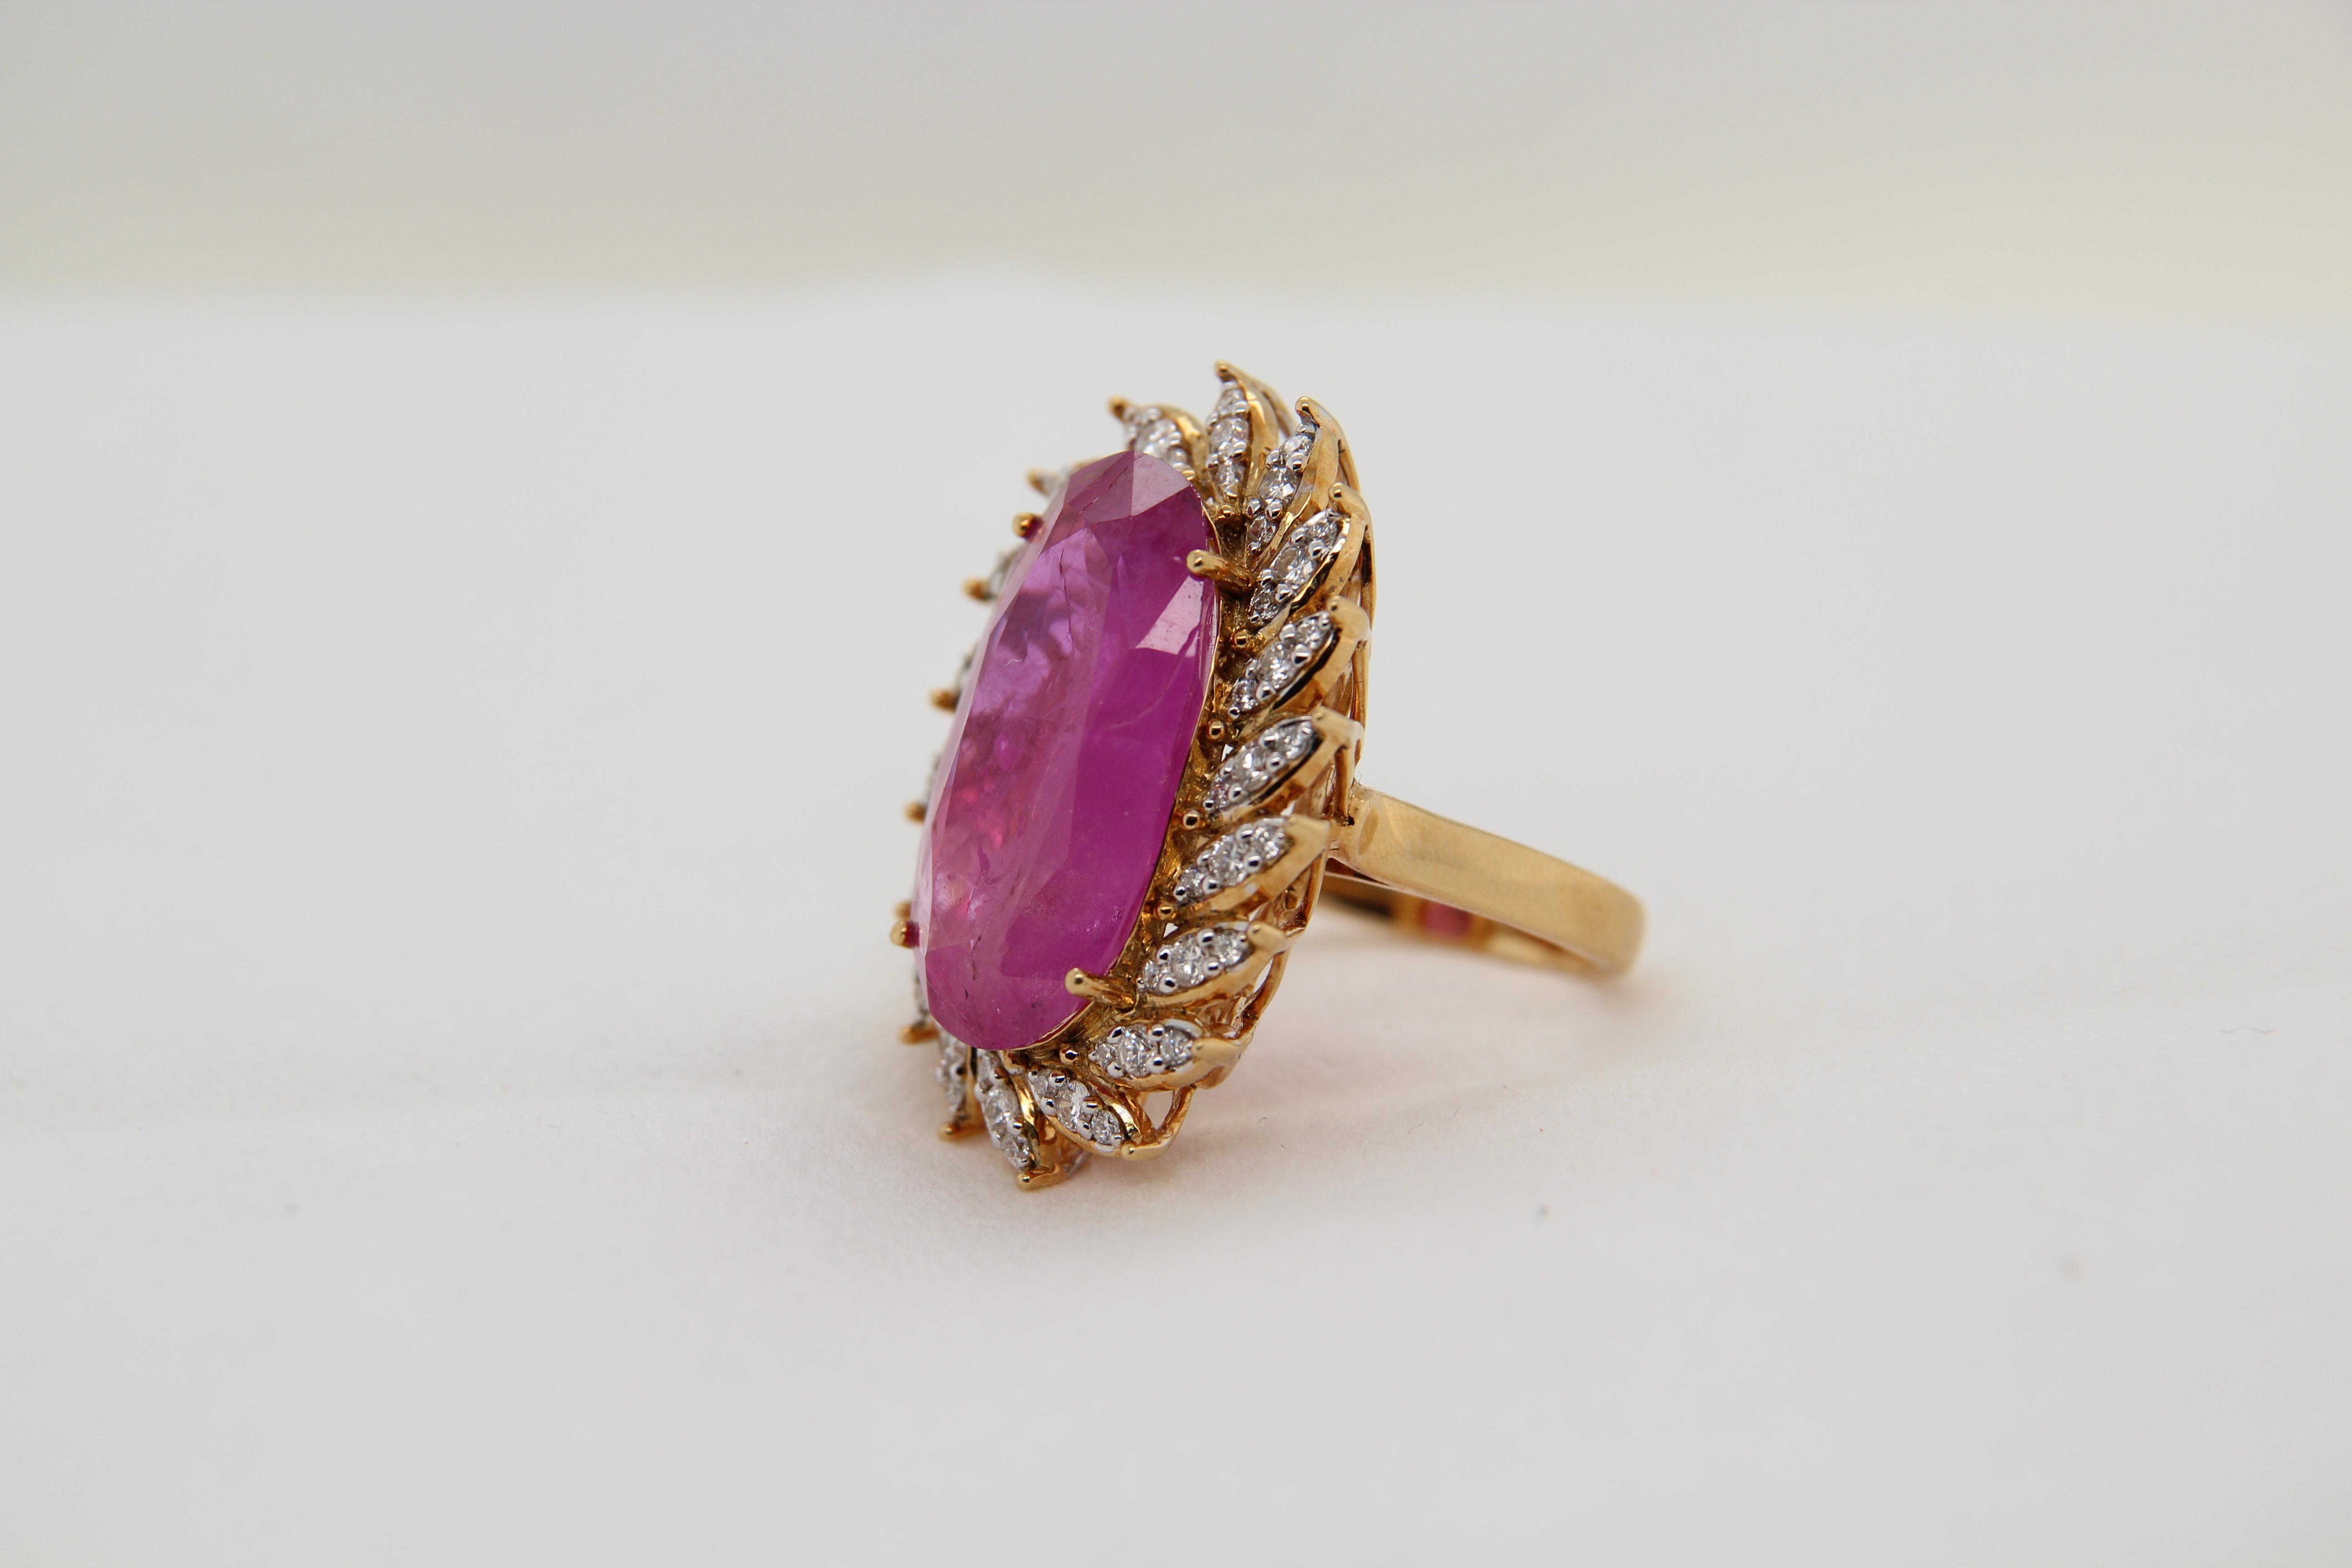 A new GRS certified Heated Burmese pink sapphire ring made in 18 Karat gold. The total ruby weight is 17.58 carats, the total diamond weight is 0.74 carats, and the total ring weighs 13.14 grams. This ring is resizable. 